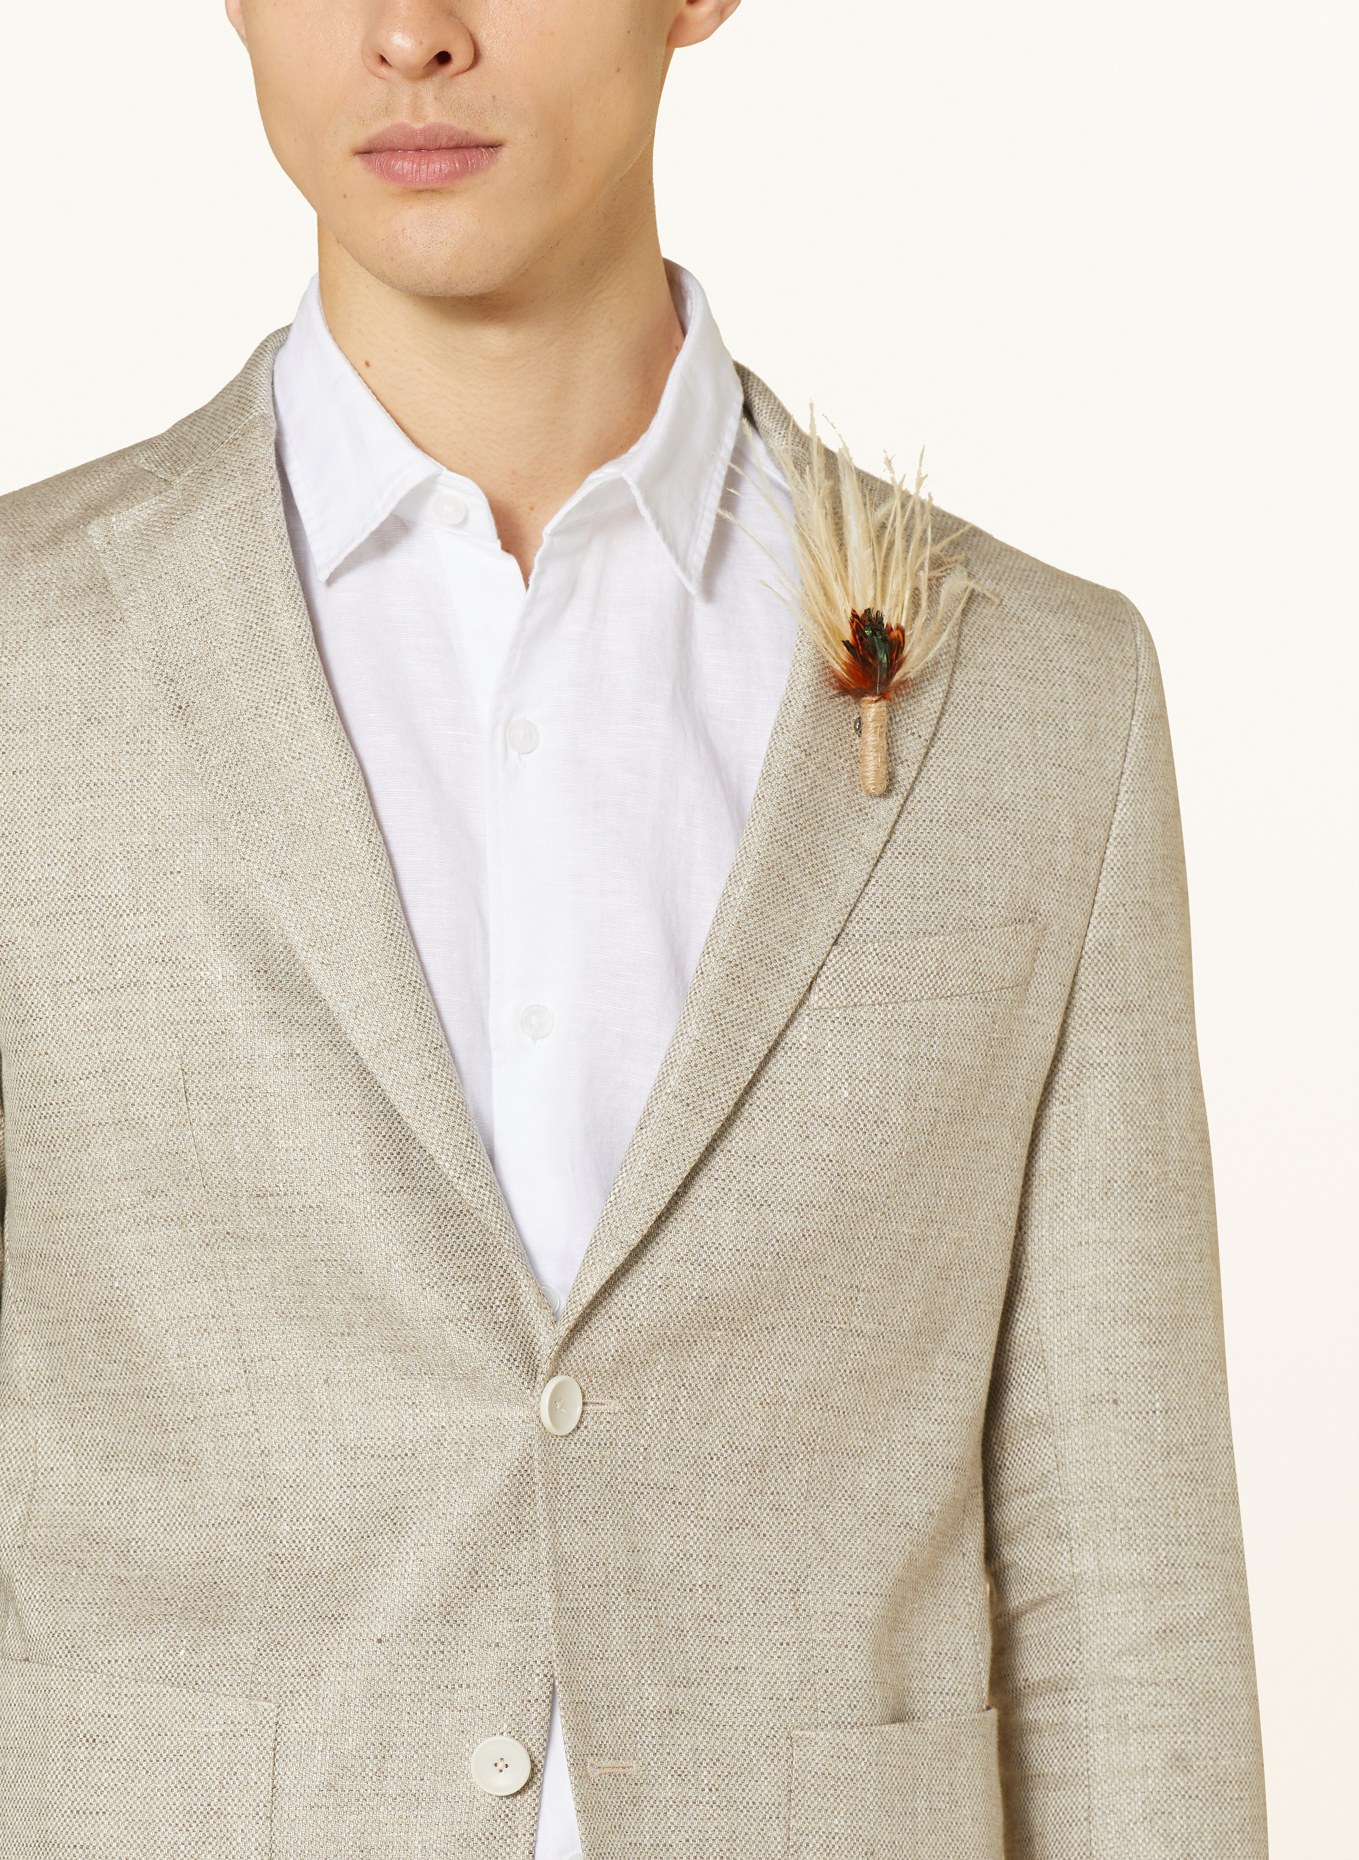 CG - CLUB of GENTS Suit jacket SG PETERSON slim fit with linen, Color: 21 HELLBEIGE (Image 6)